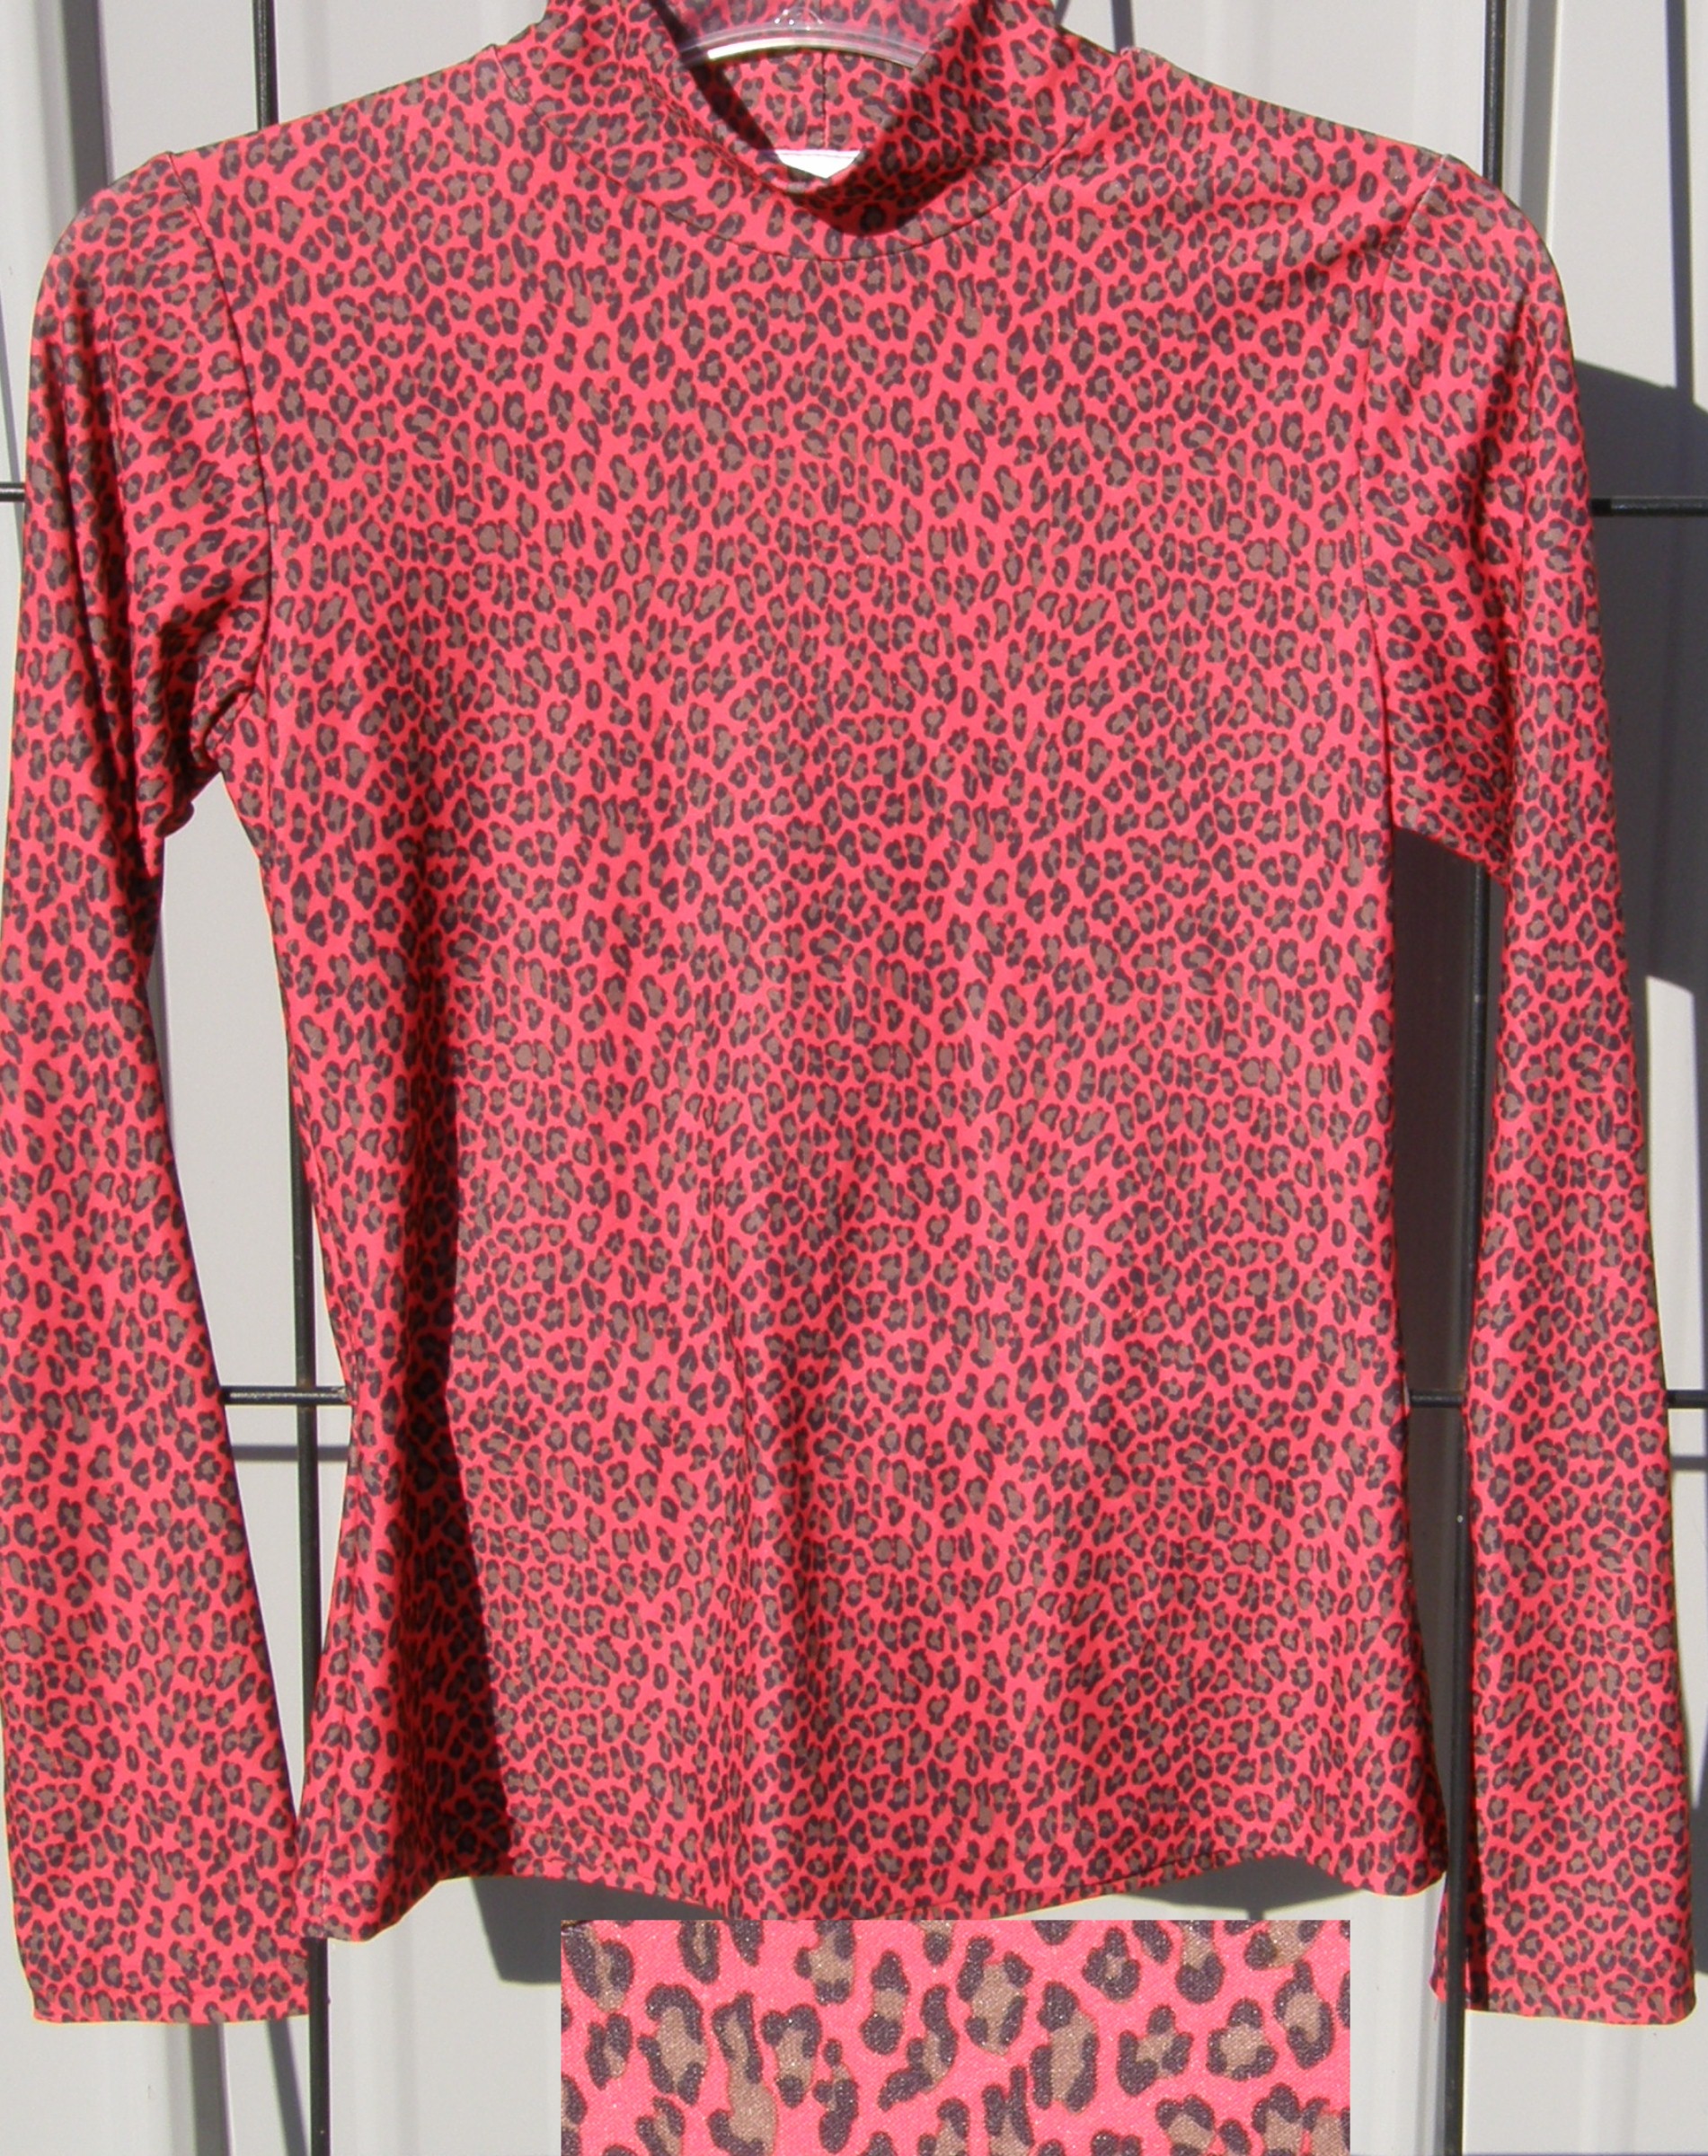 Rods Slinky Top Western Show Shirt Red Leopard Print Red Animal Print Ladies M